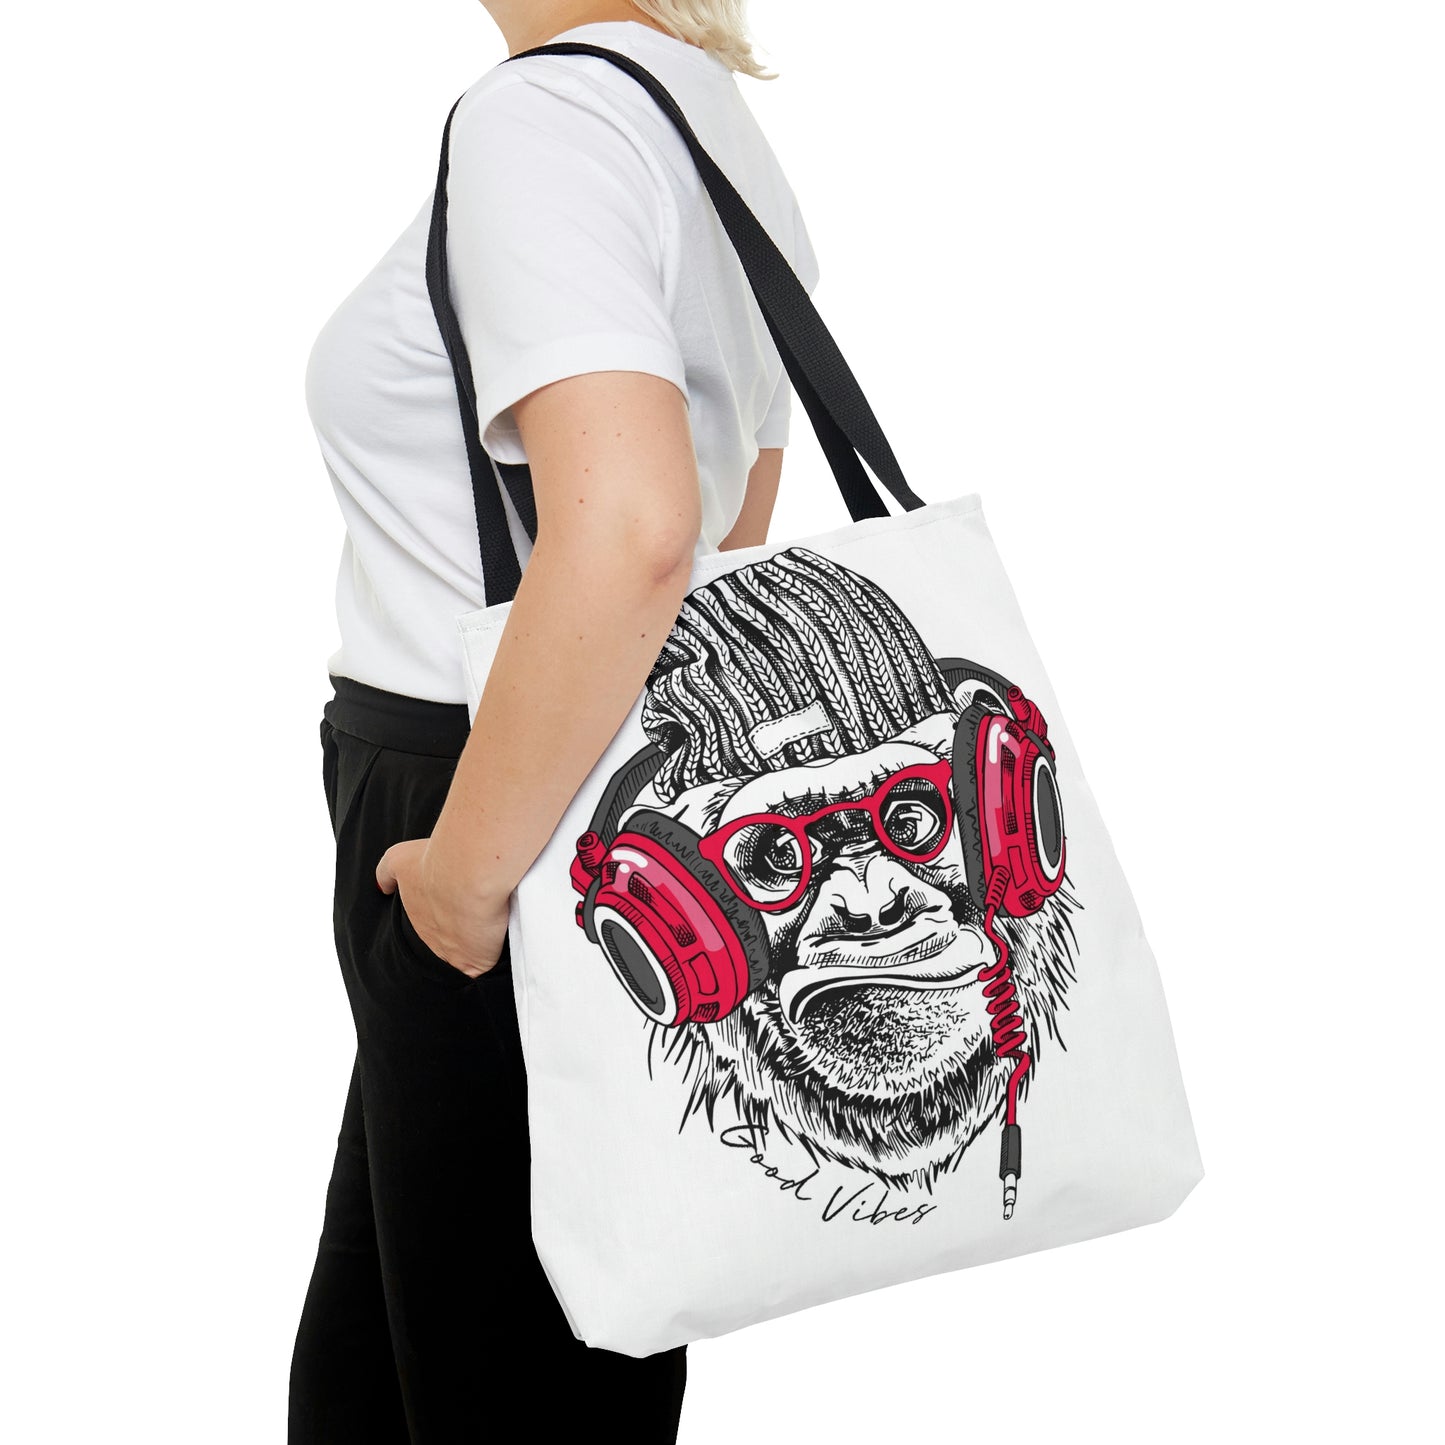 AOP Tote Bag "Funny Monkey and pink headphones"